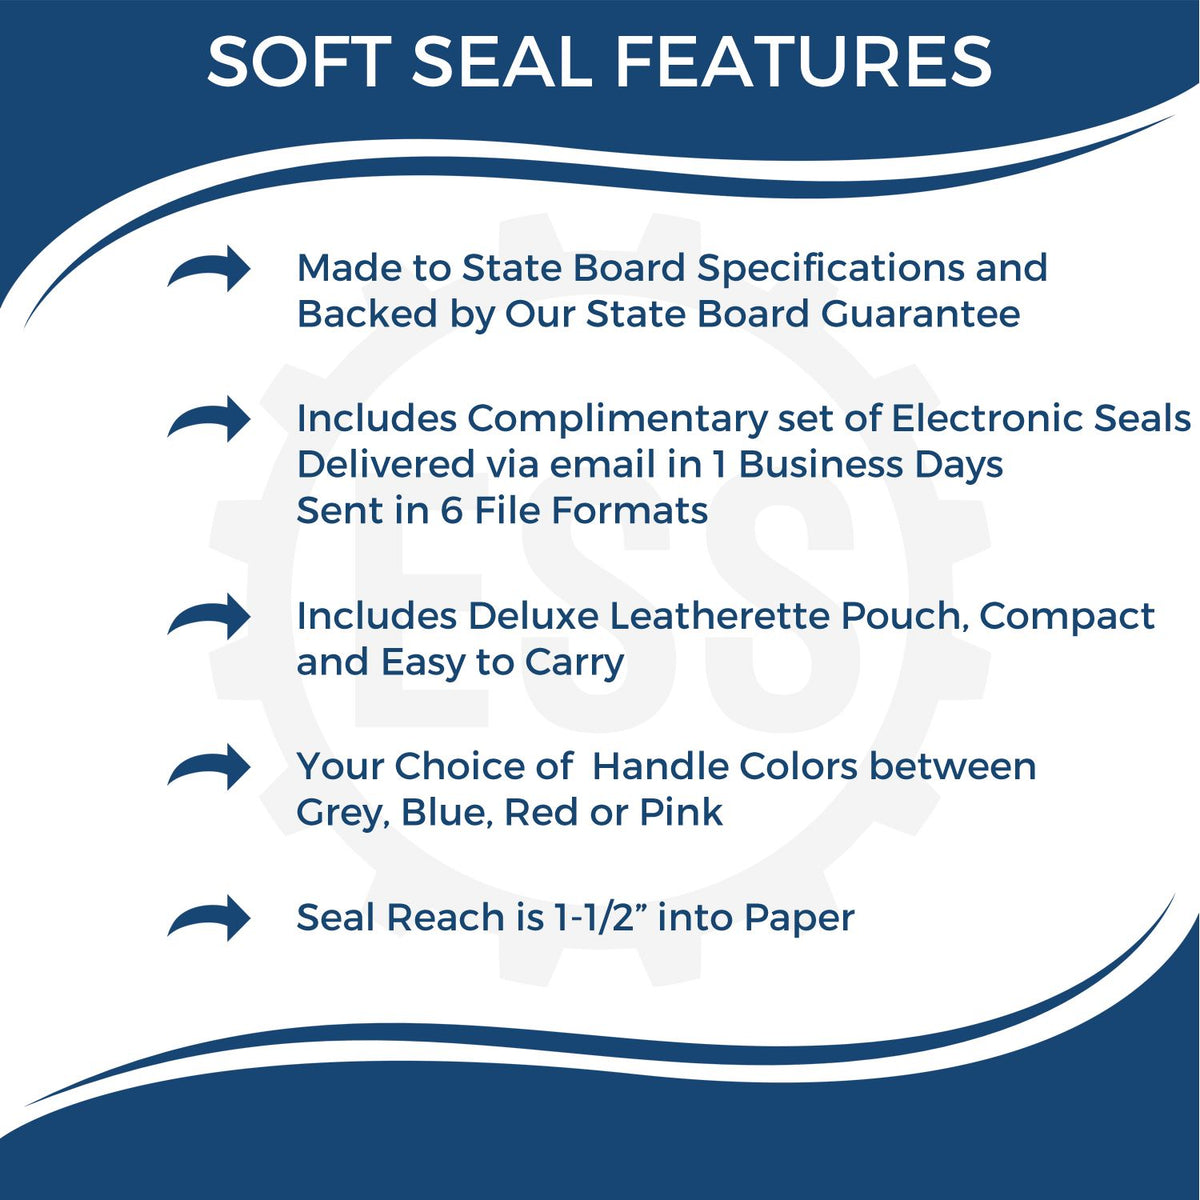 A picture of an infographic highlighting the selling points for the Soft New York Professional Geologist Seal